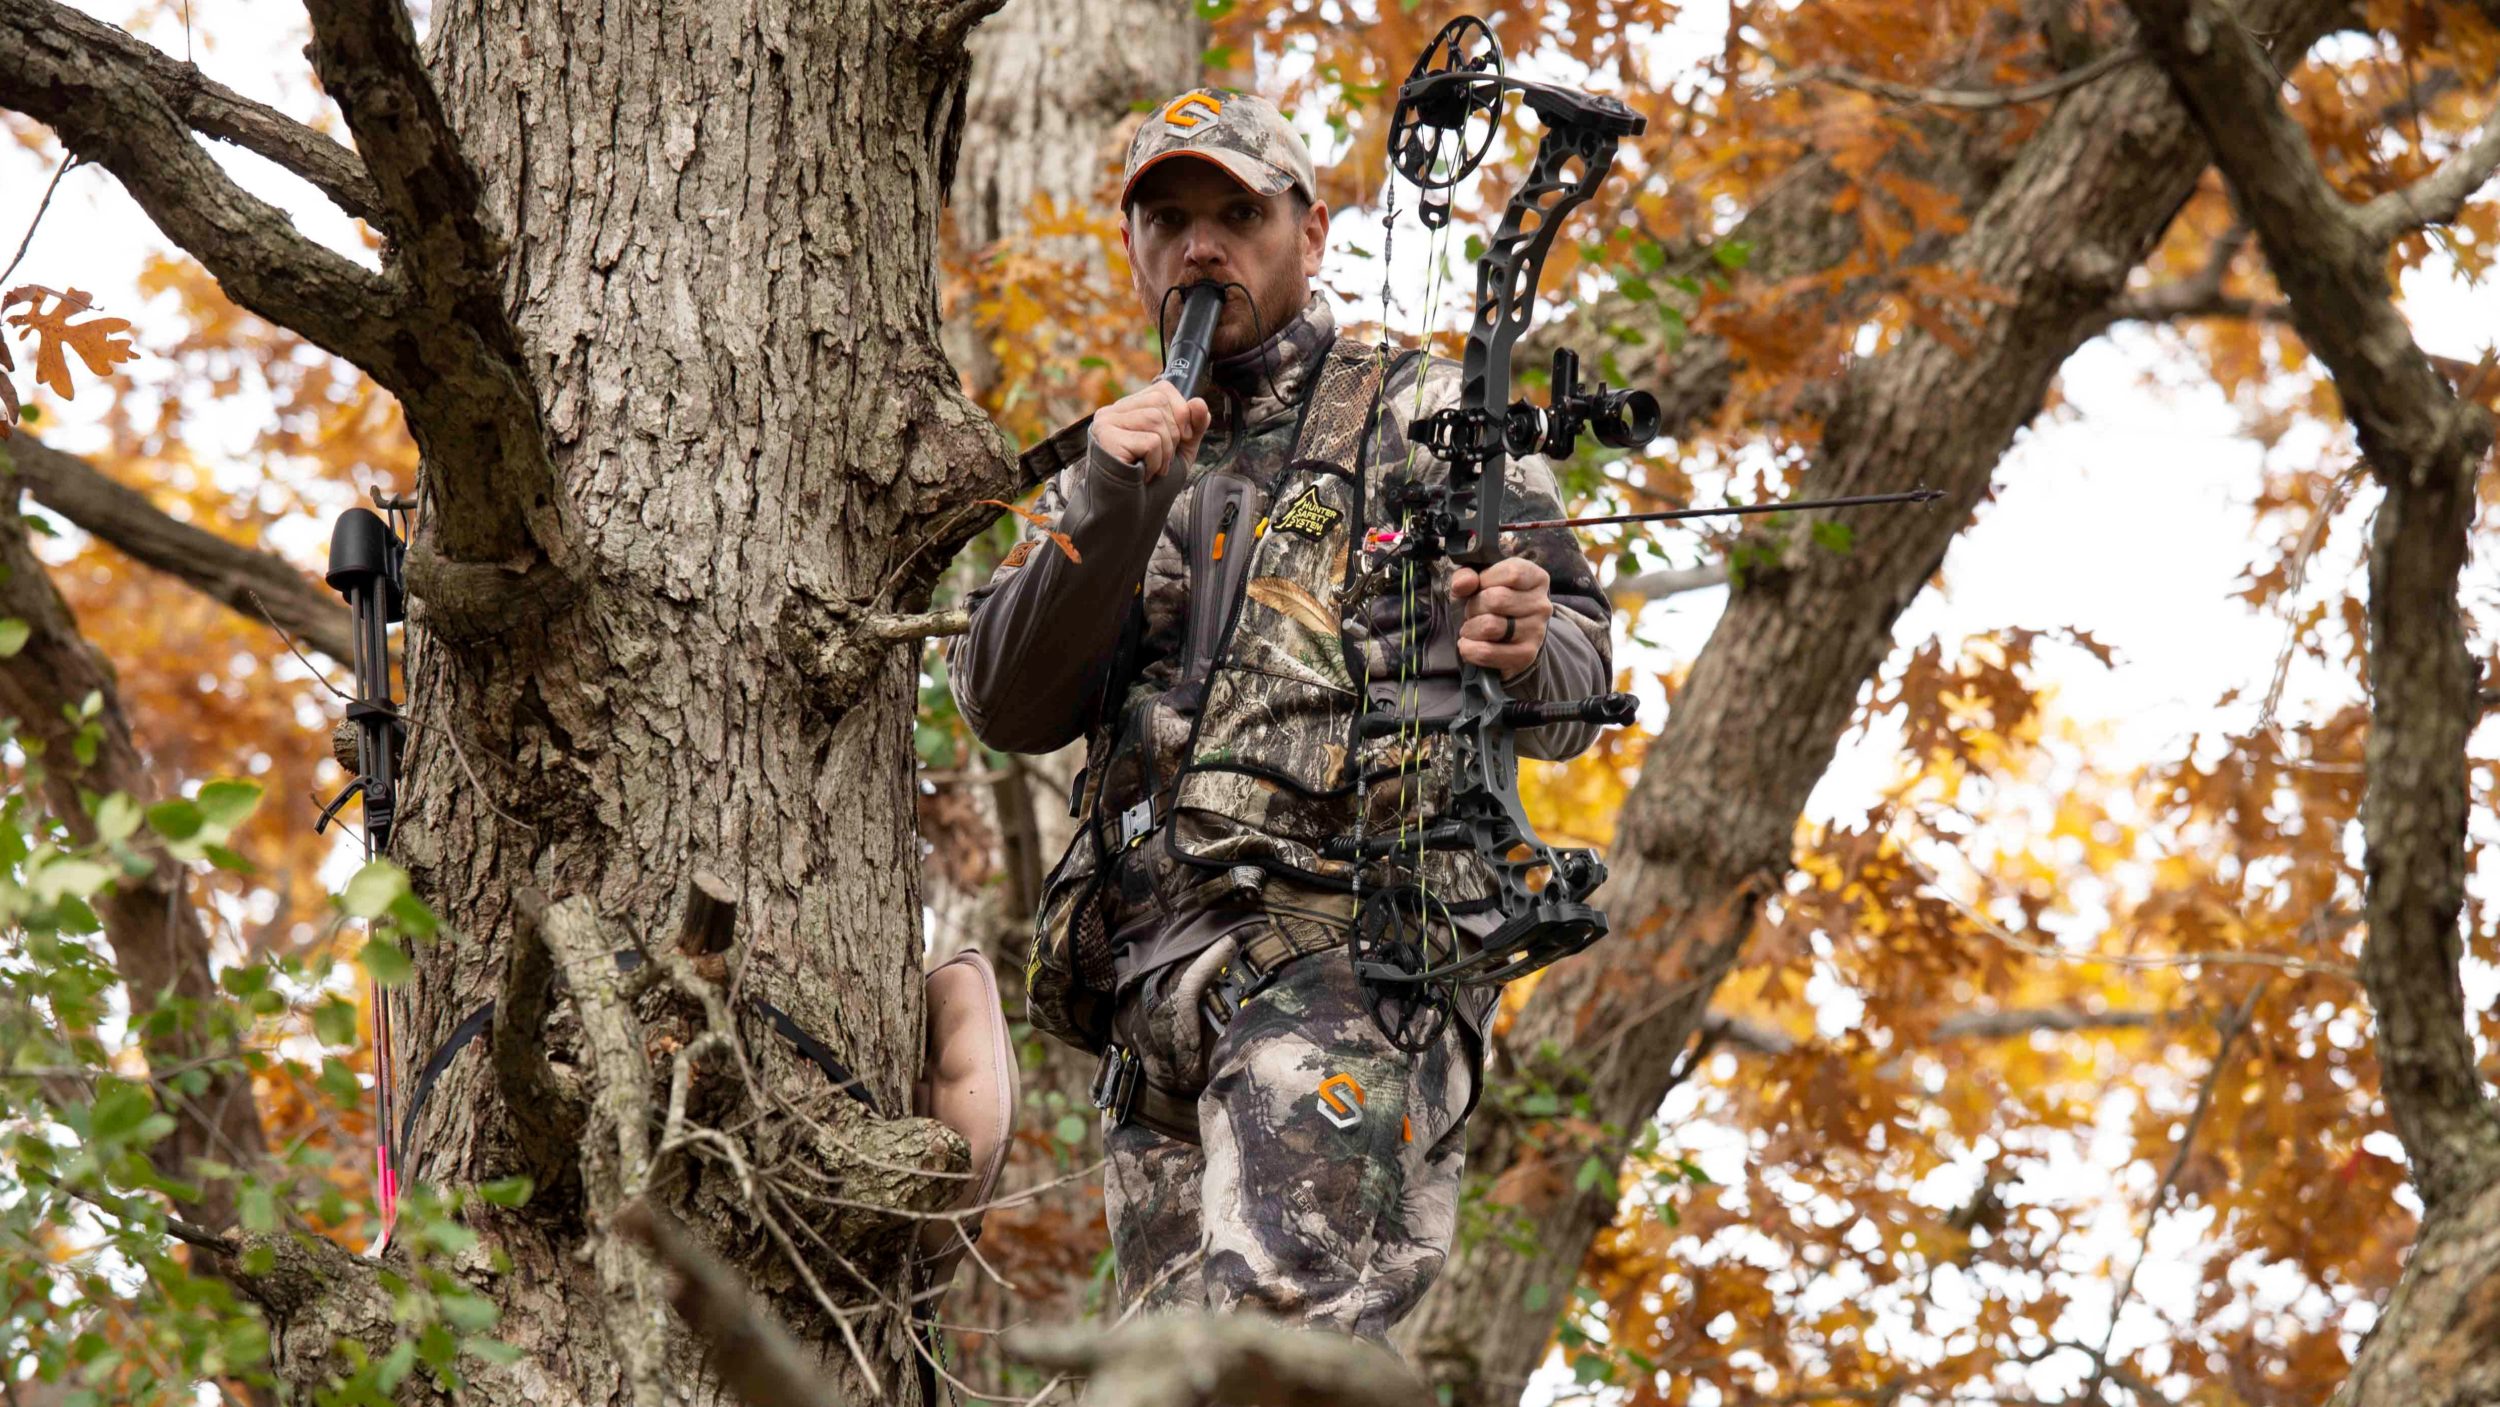 Killer Calls for Early Season Whitetail | Bowhunting.com